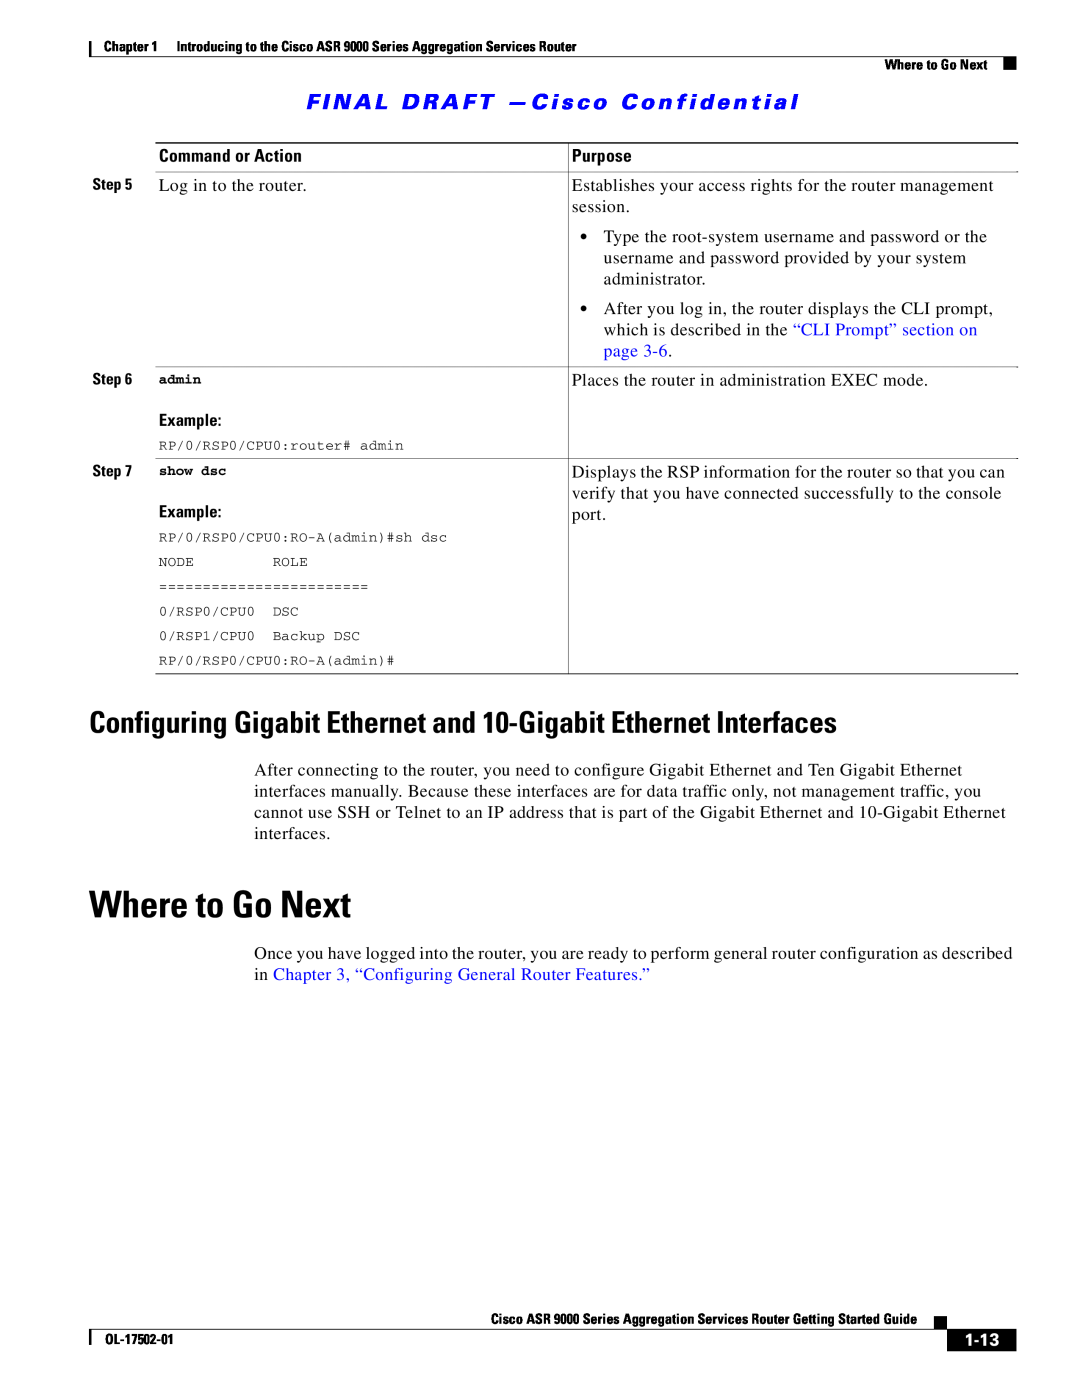 Cisco Systems ASR 9000 manual Where to Go Next, Configuring Gigabit Ethernet and 10-Gigabit Ethernet Interfaces, page, 1-13 